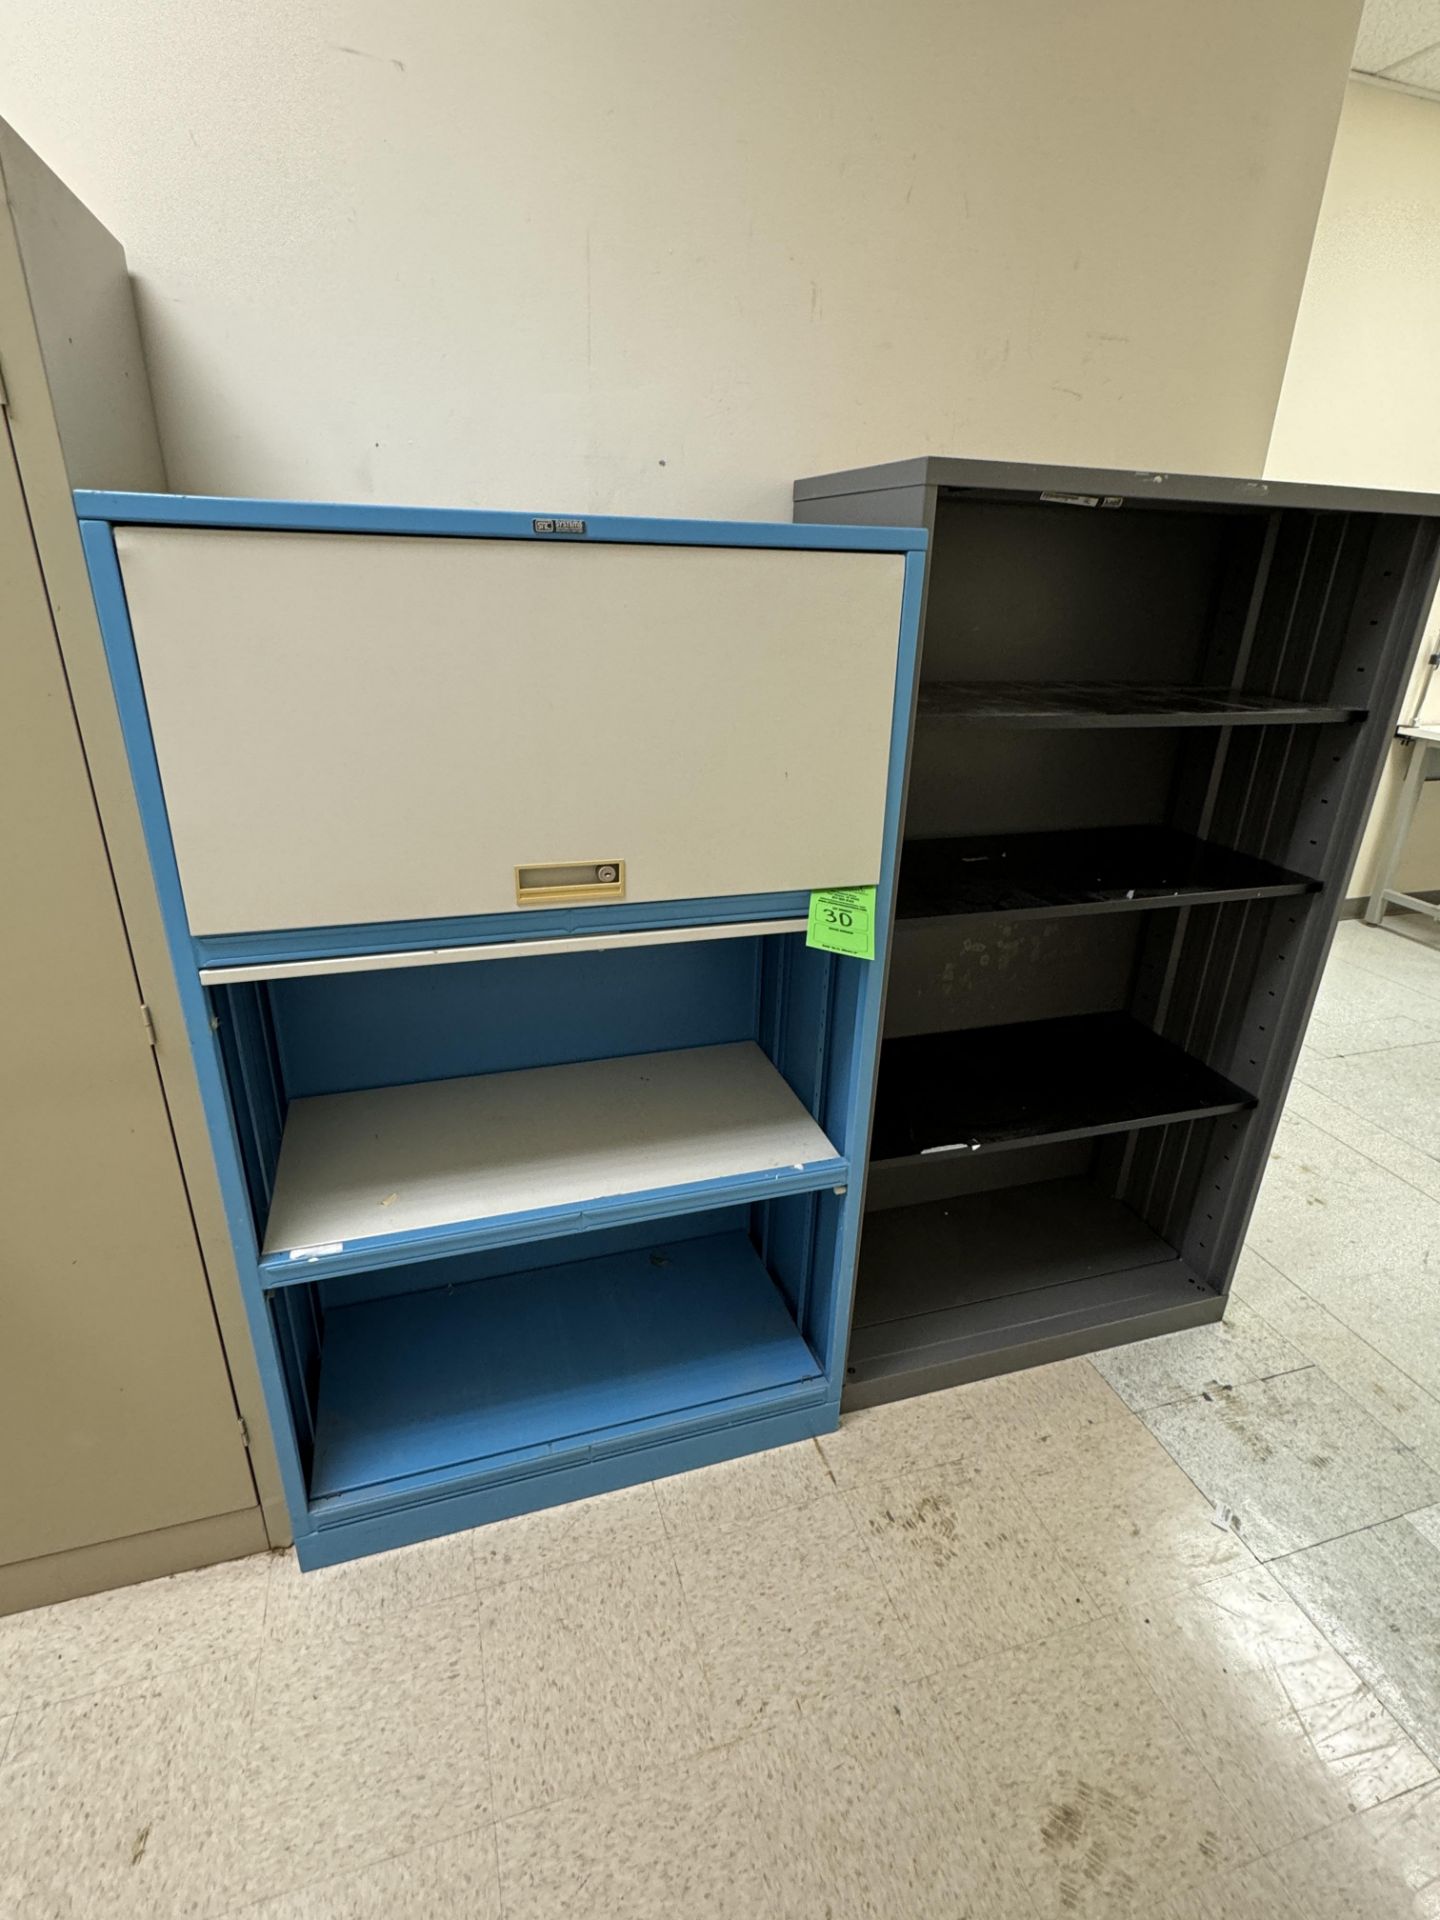 SMC SYSTEMS SLIDING DOOR CABINET; 3-SHELF MOBILE CHAIRS (ZONE 3)